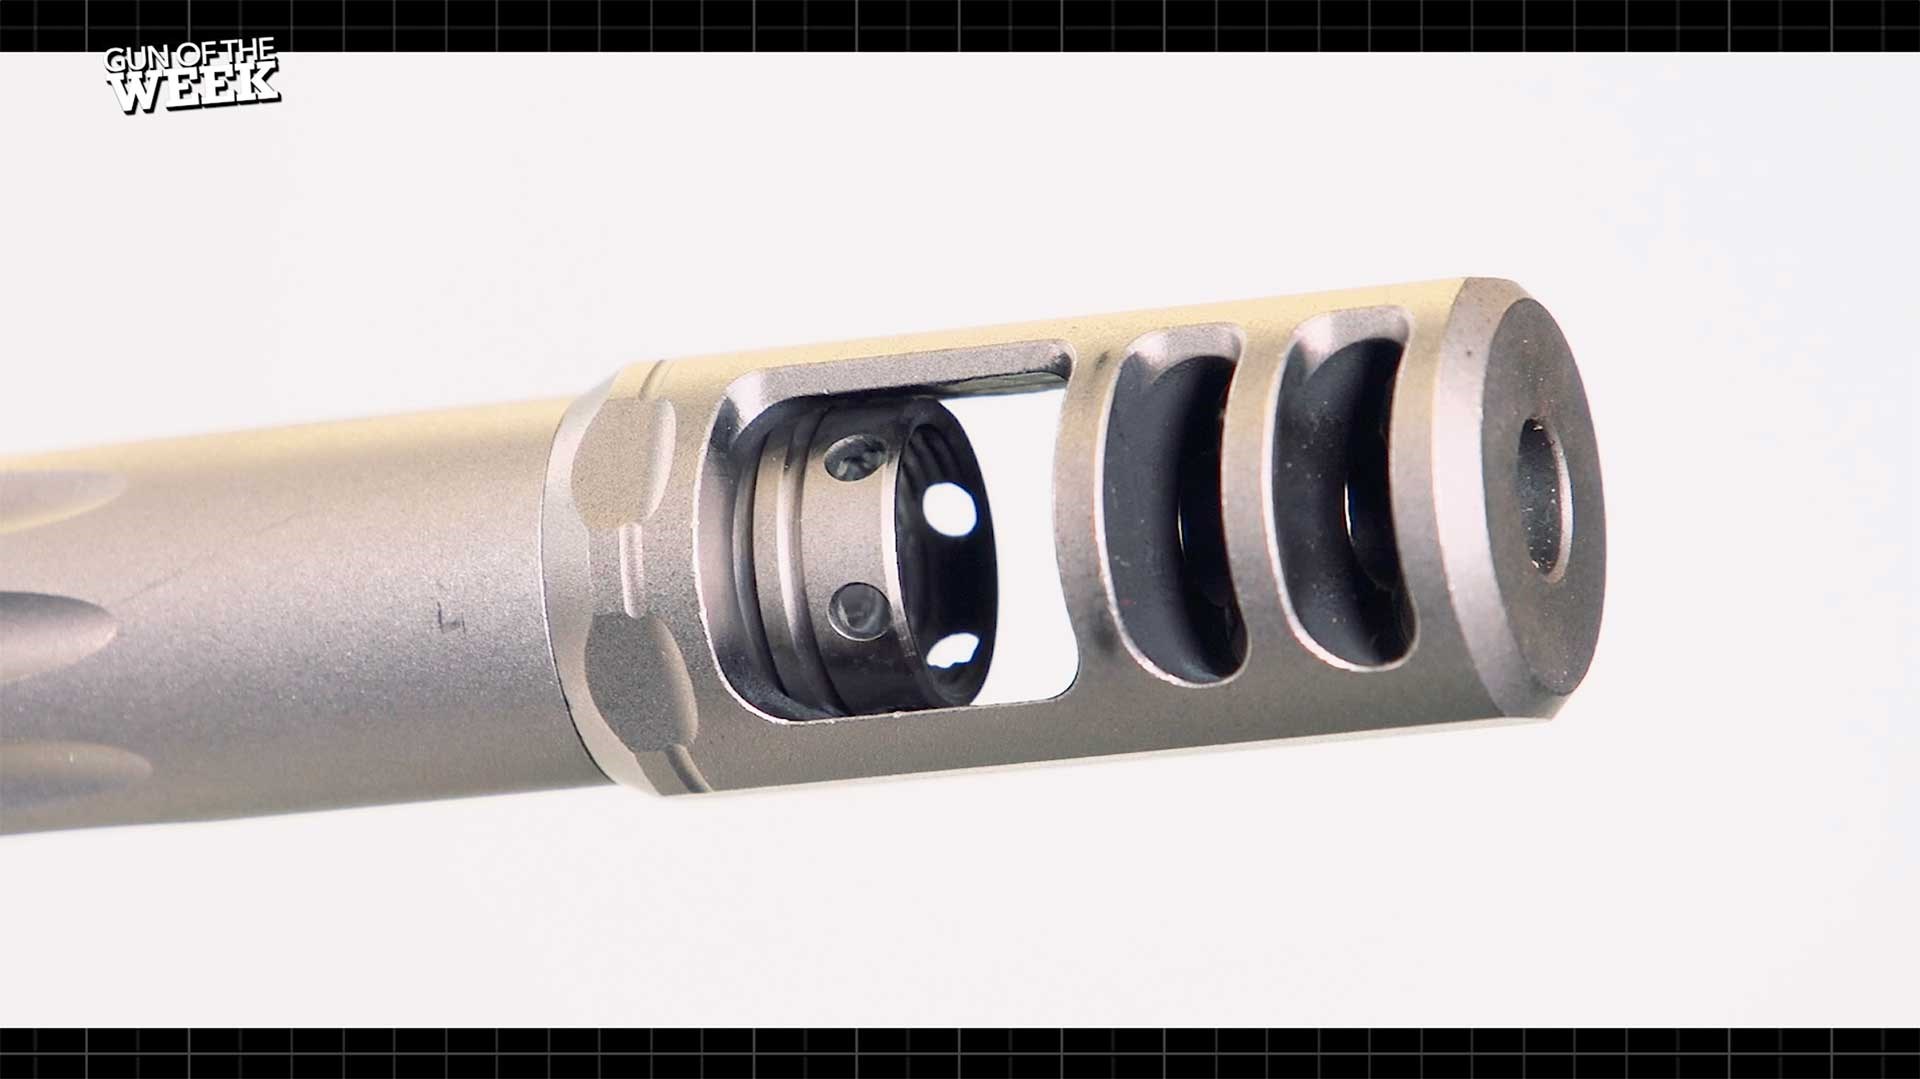 Silver muzzle brake at the end of the Browning X-Bolt Target Max rifle's barrel.